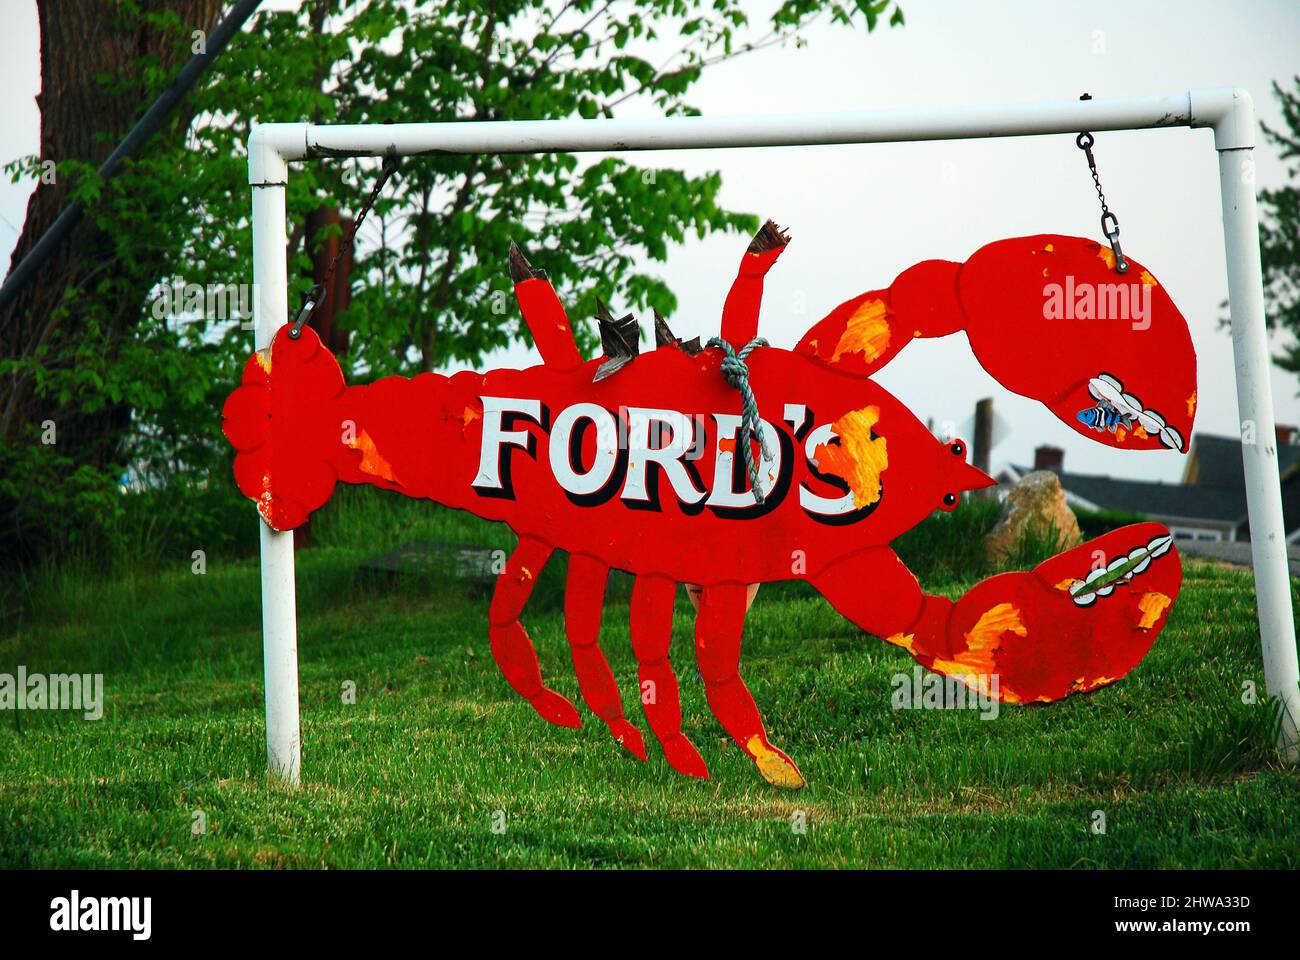 A weathered sign in Niantic, Connecticut tells folks that lobster is the specialty Stock Photo